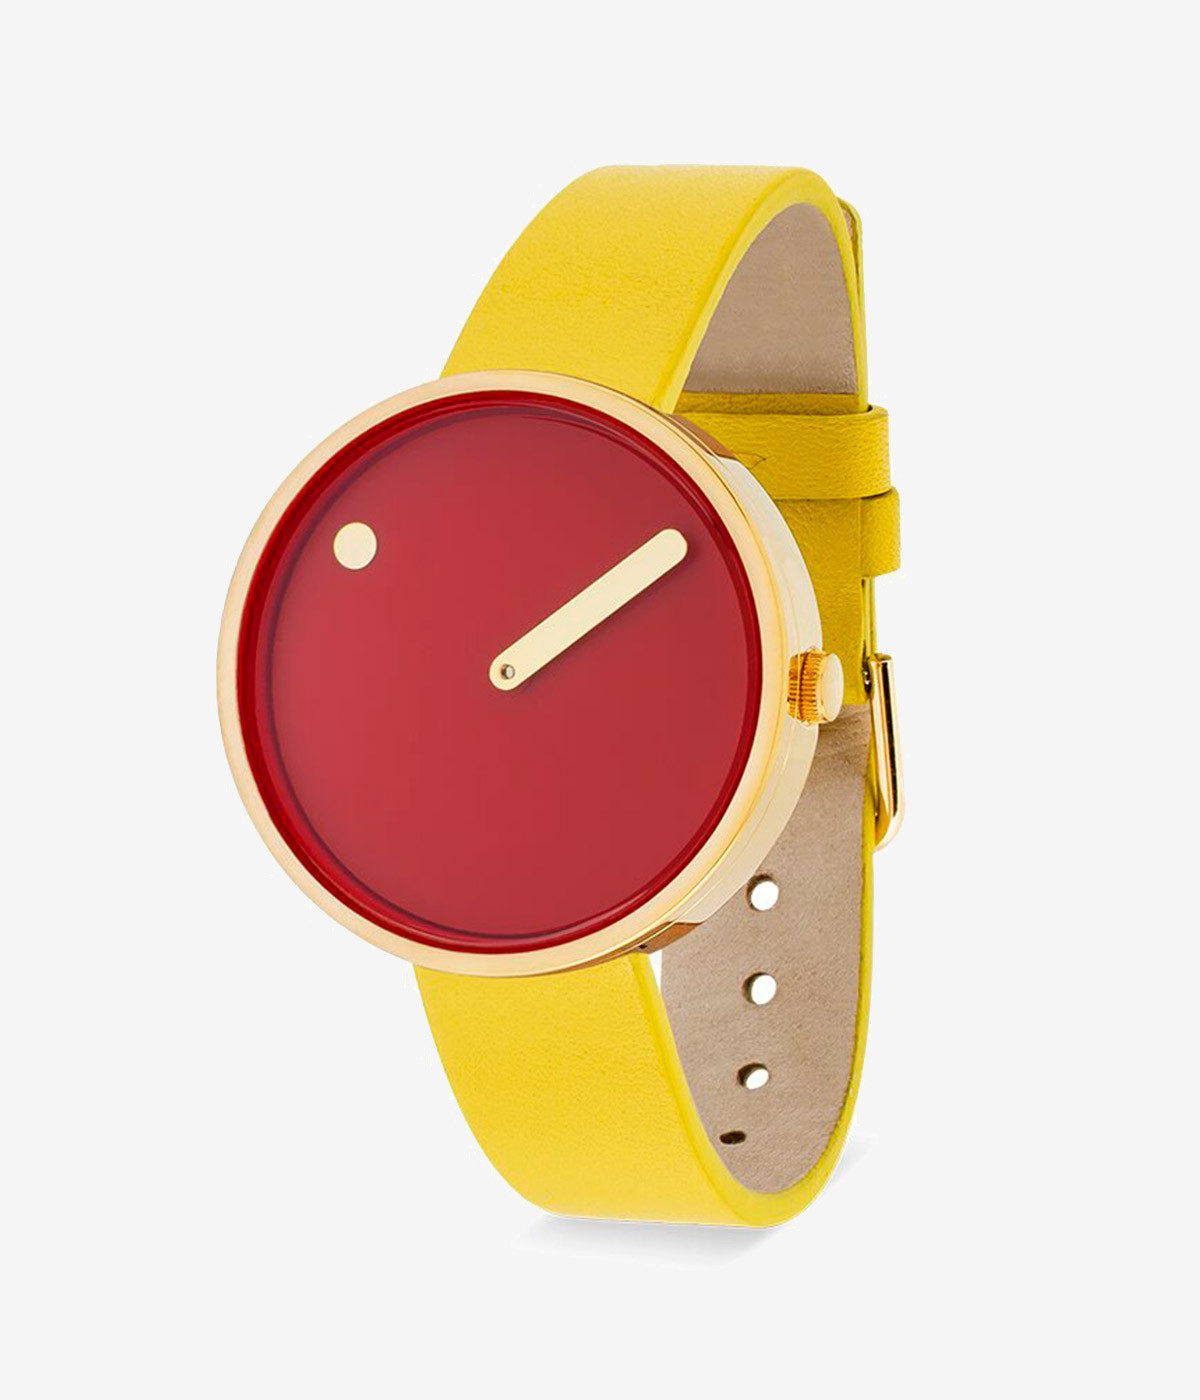 RED DIAL / YELLOW LEATHER STRAP 34 mm